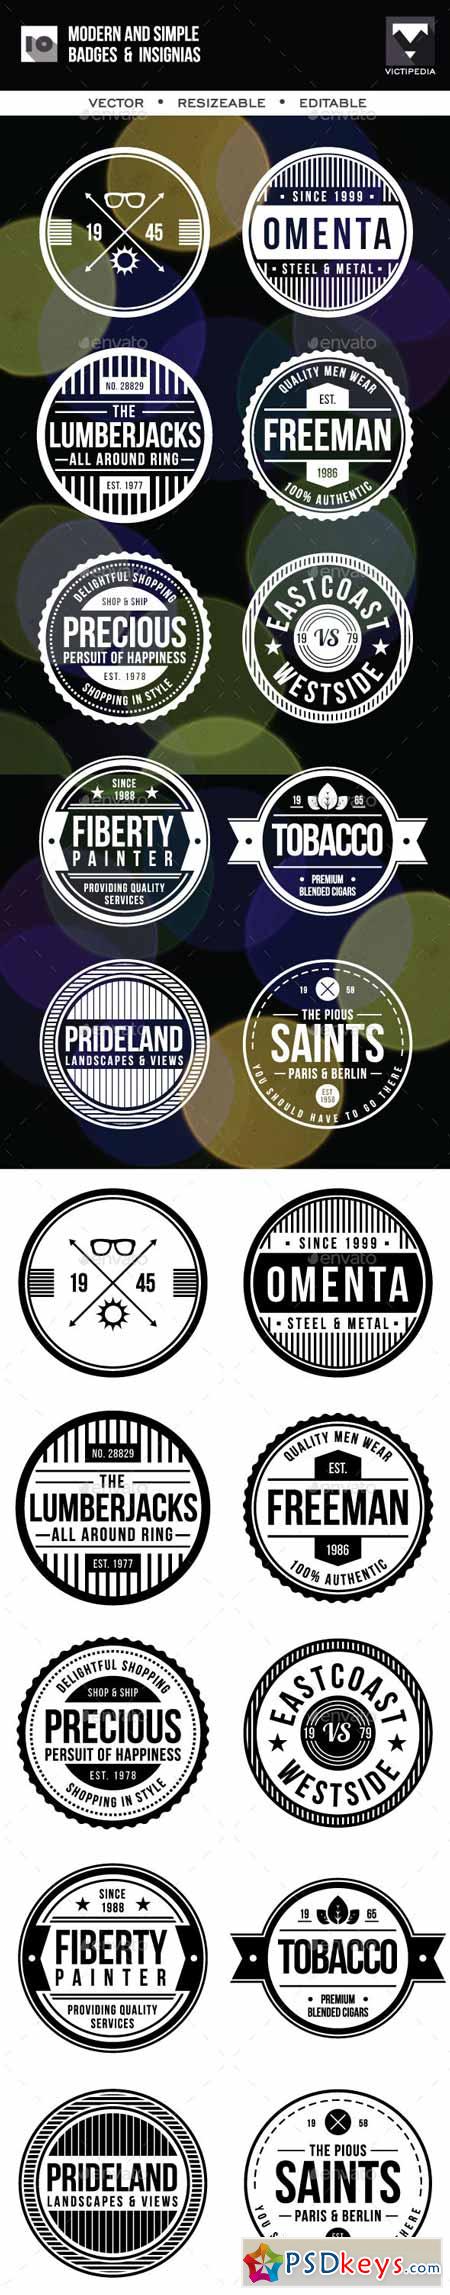 10 Modern And SImple Badges 10274164